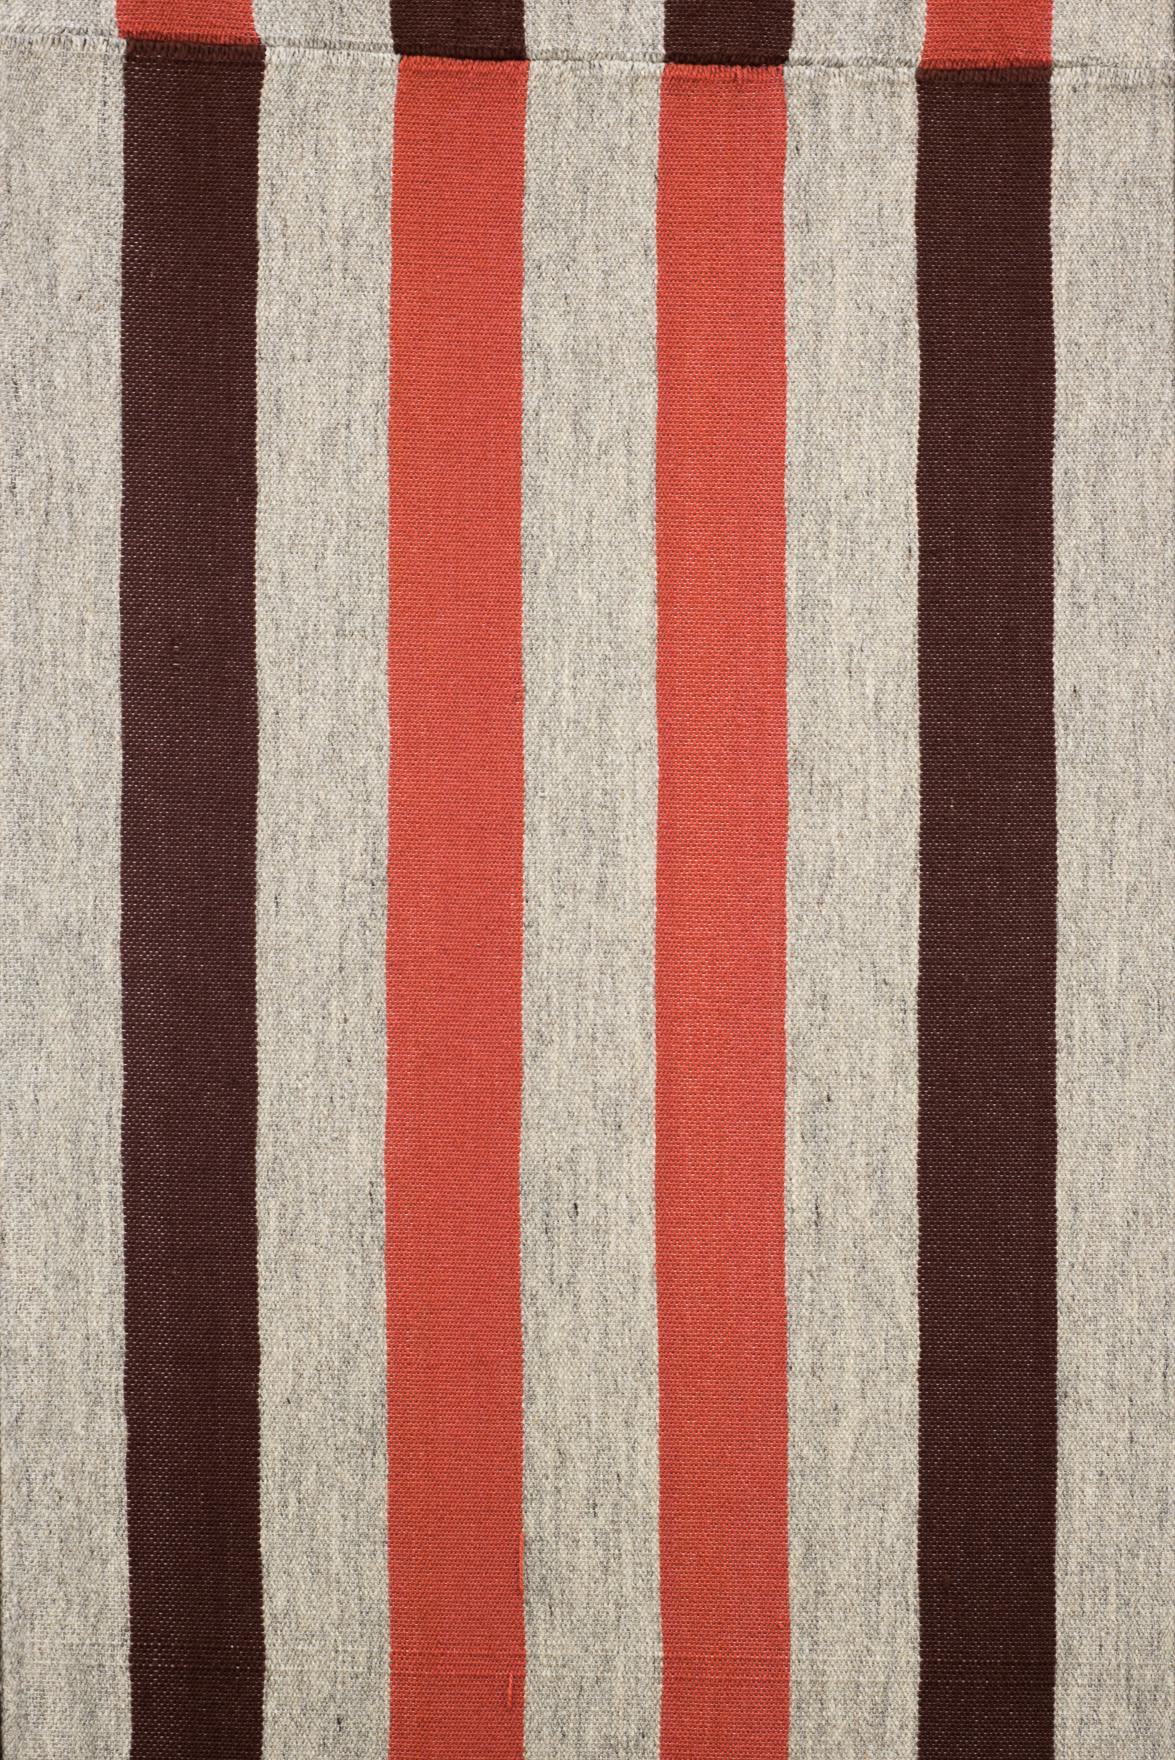 A close view of a woven textile which has a striped pattern of alternating brown, orange and tan colours.